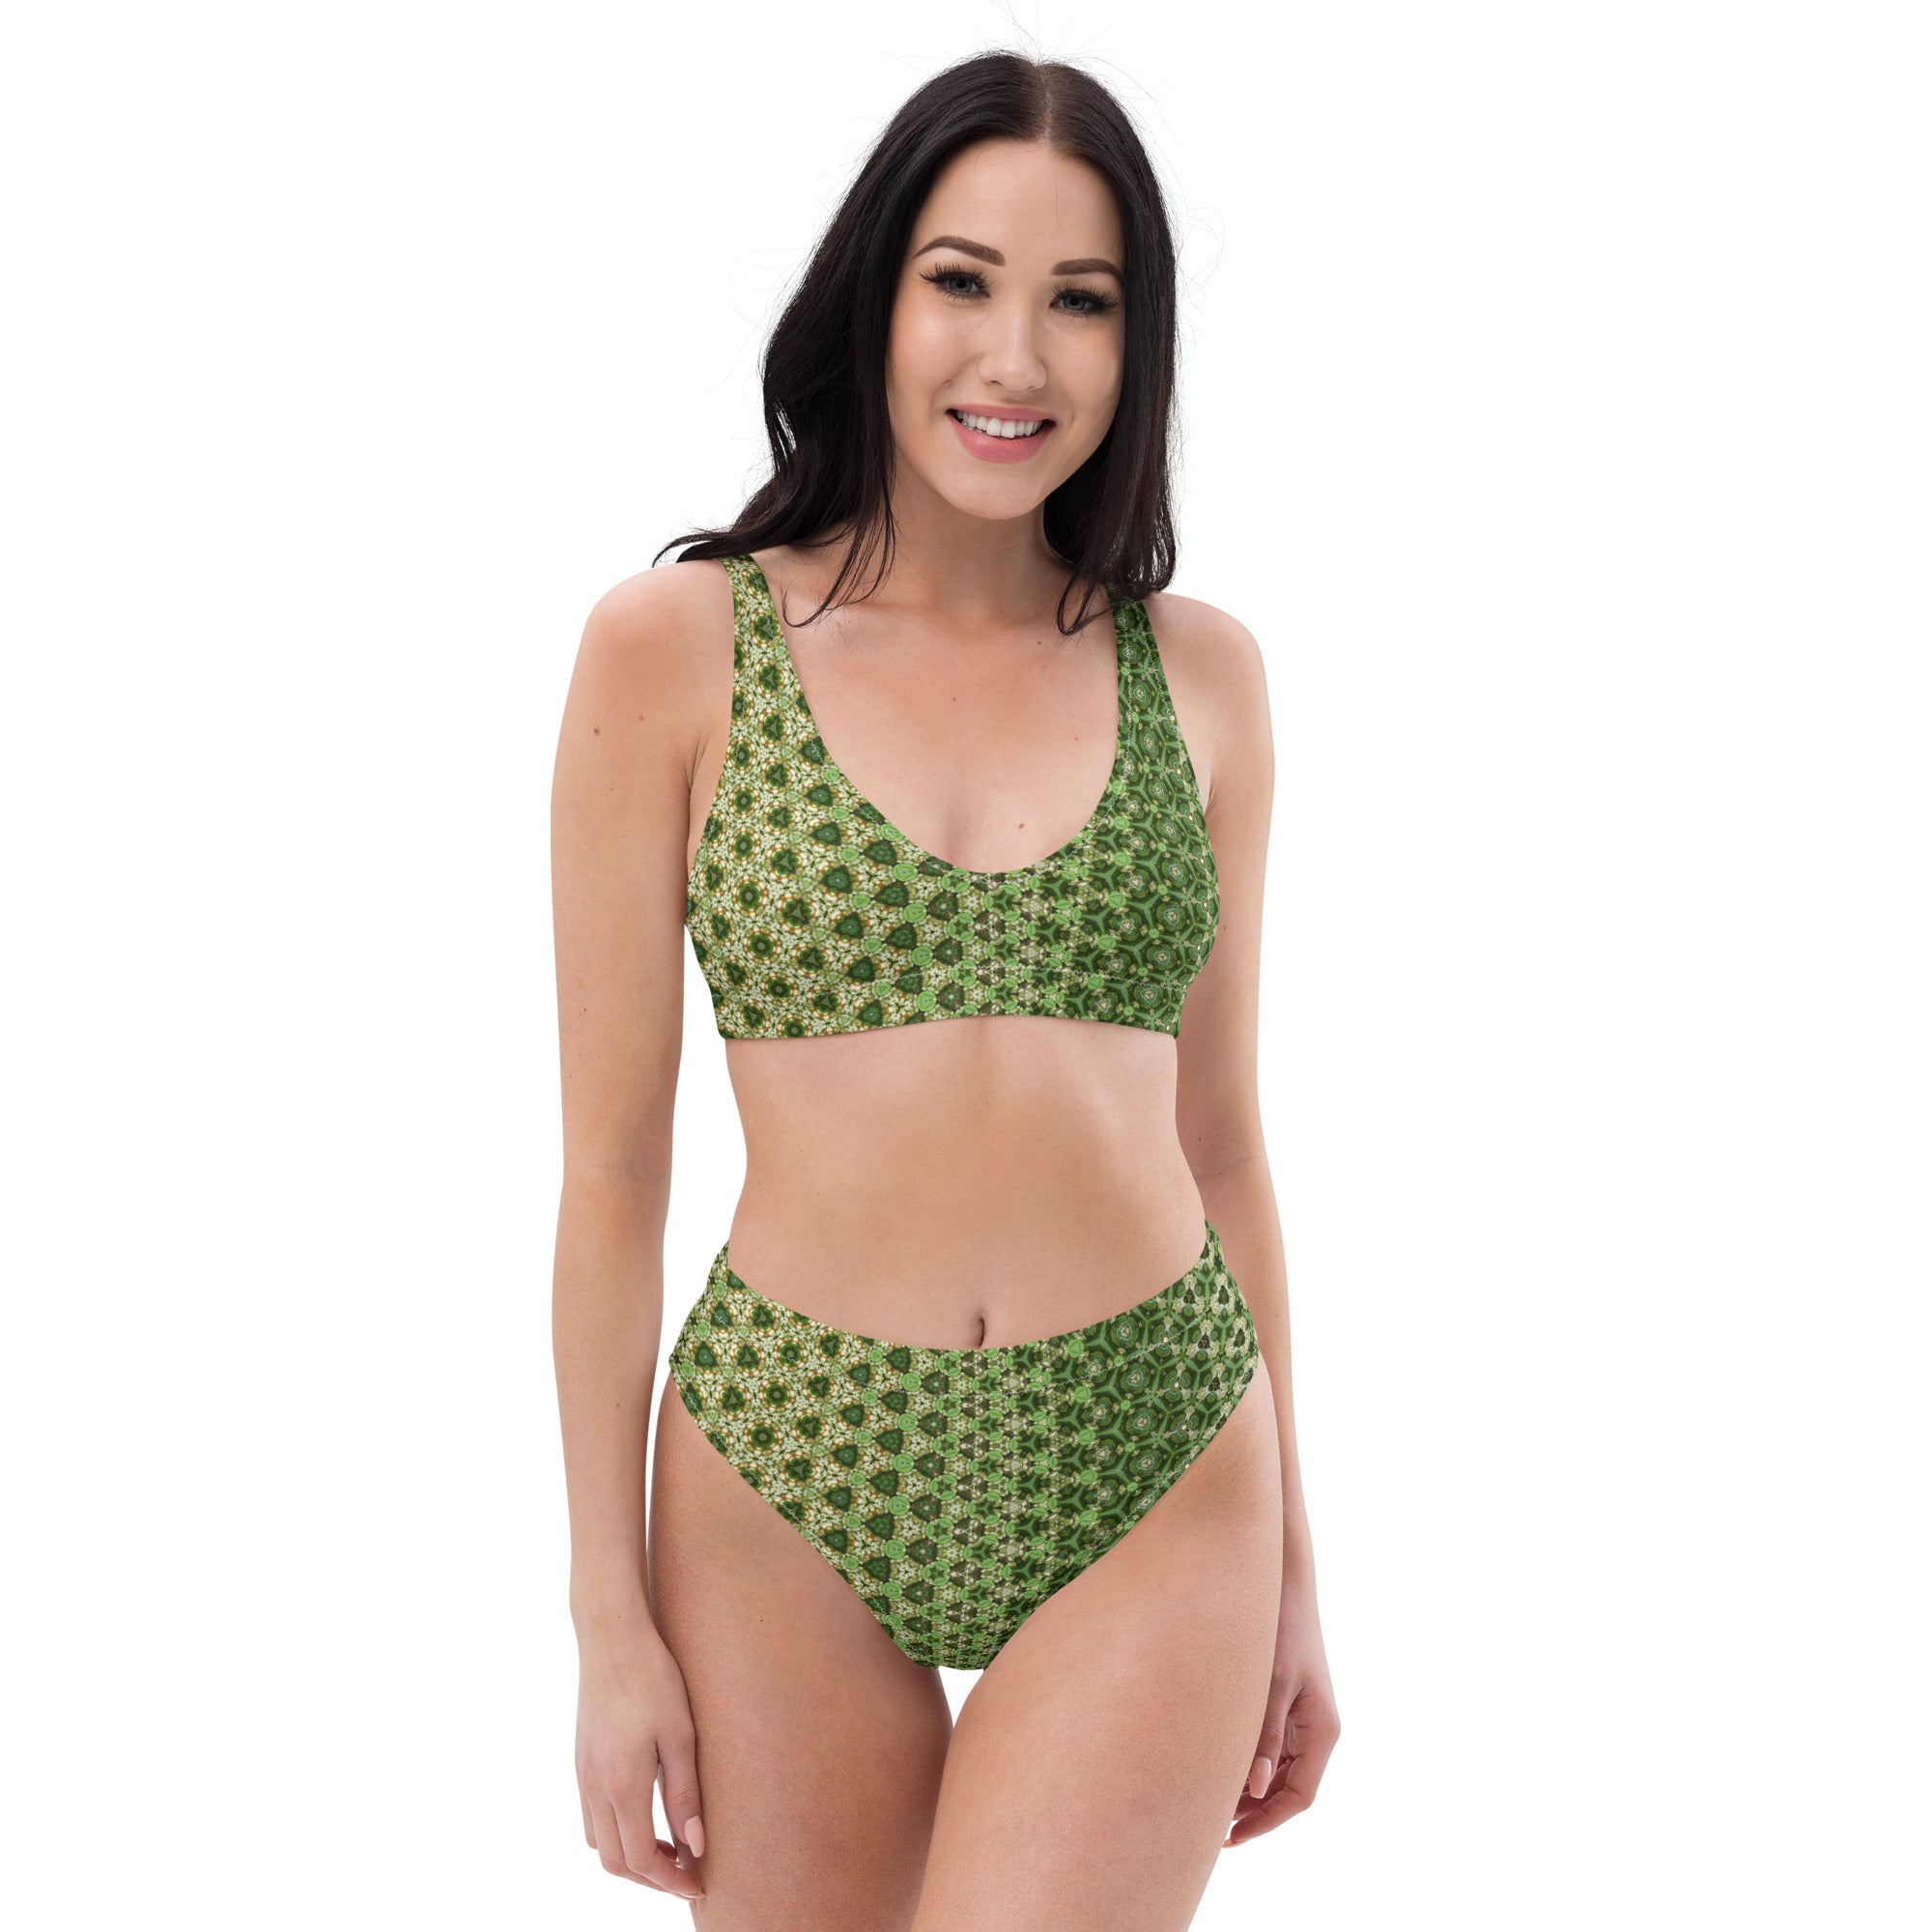 Scarabee Green Pyramid patterned Recycled high-waisted bikini, by Sensus Studio Design